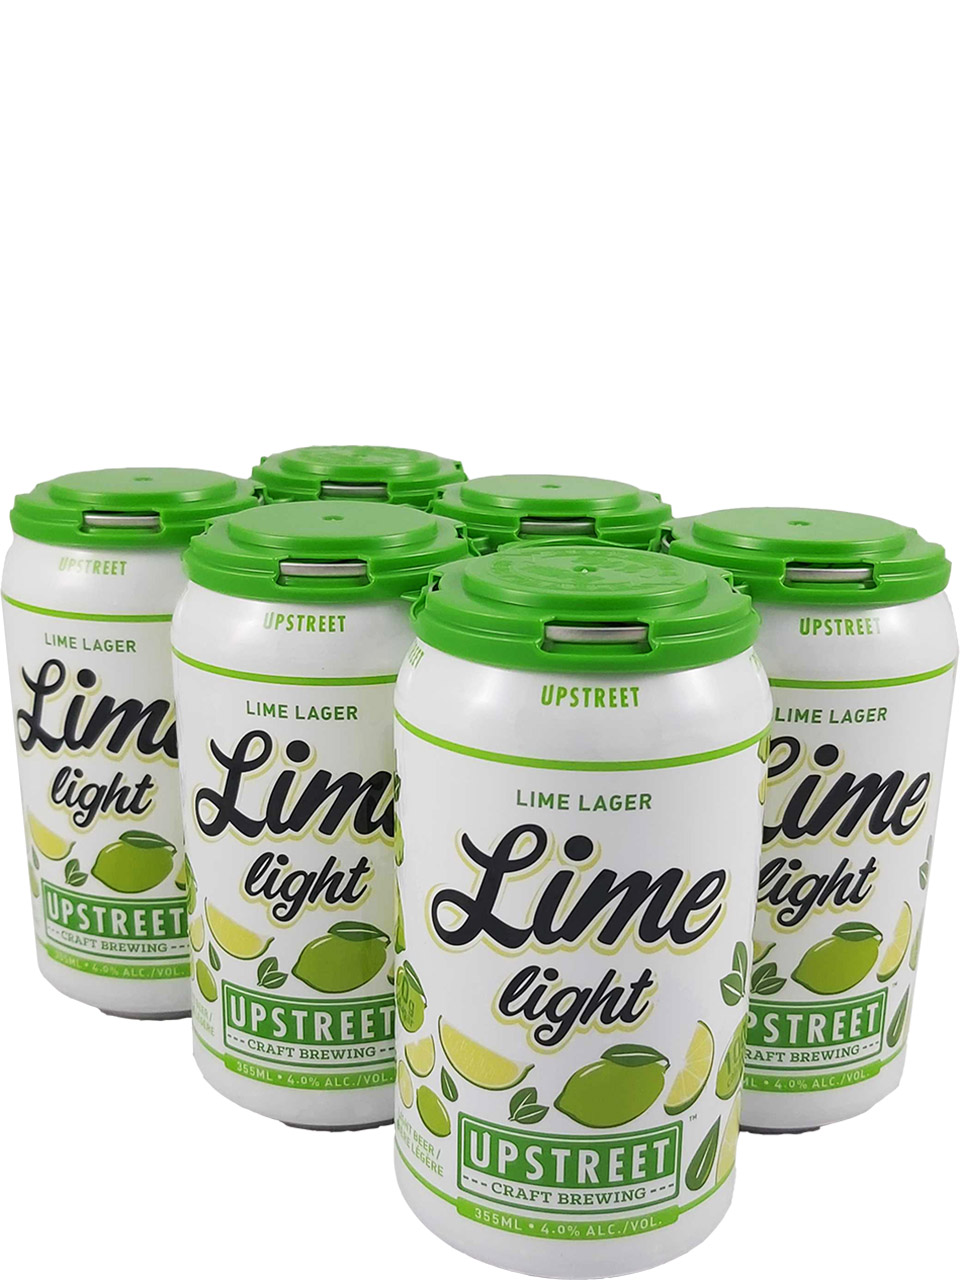 Upstreet Limelight Lime Lager 6 Pack Cans